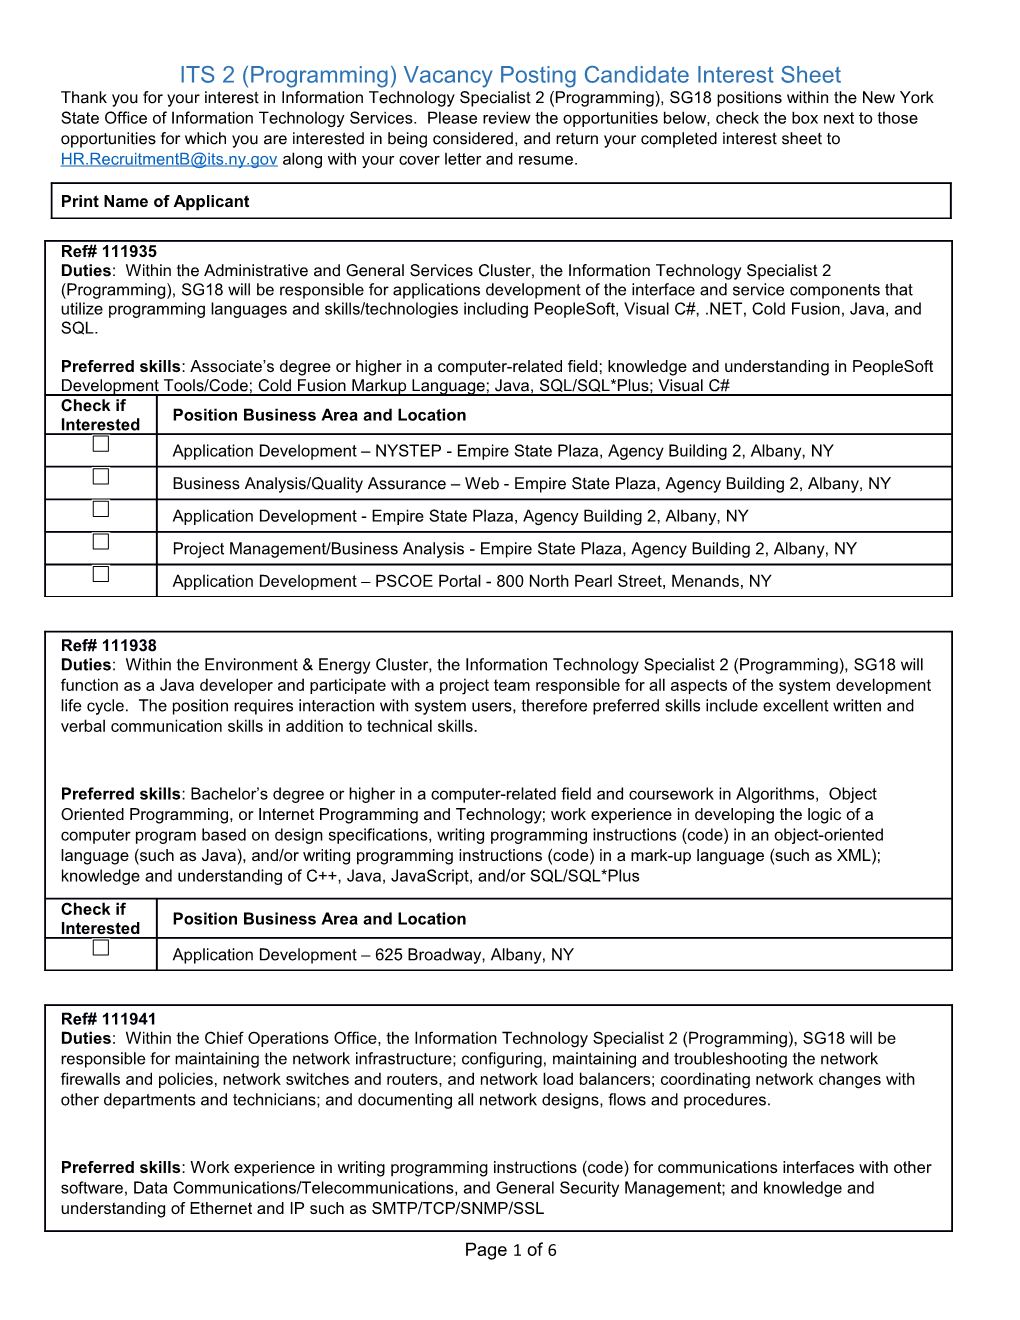 ITS 2 (Programming) Vacancy Posting Candidate Interest Sheet